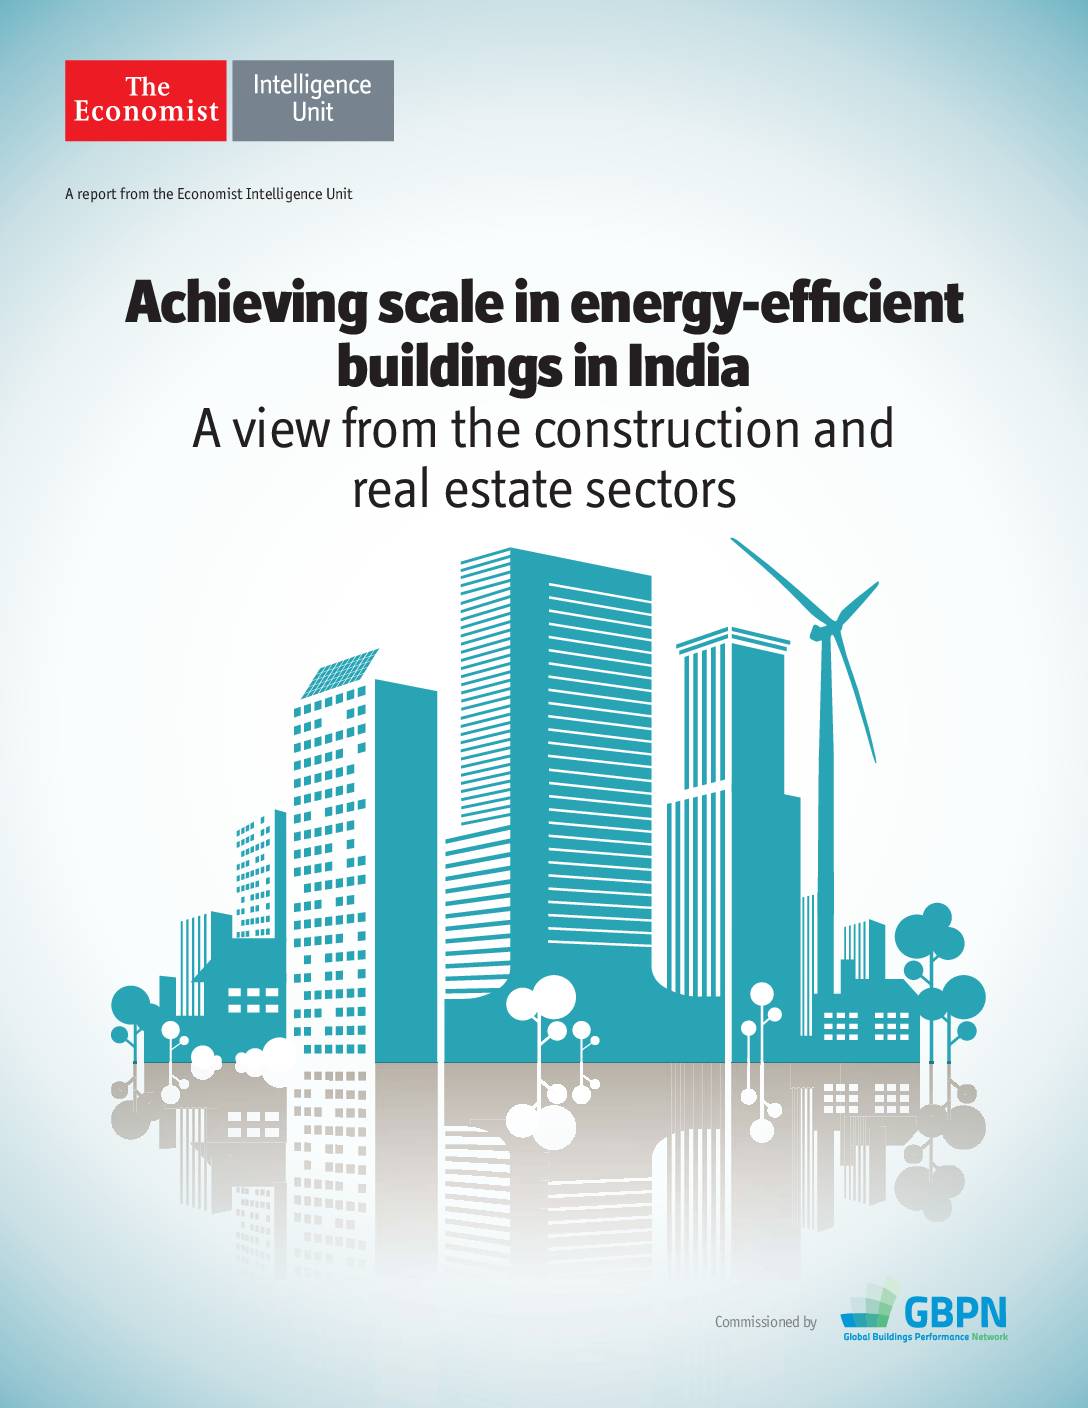 Achieving scale in energy-efficient buildings in India: A view from the construction and real estate sectors